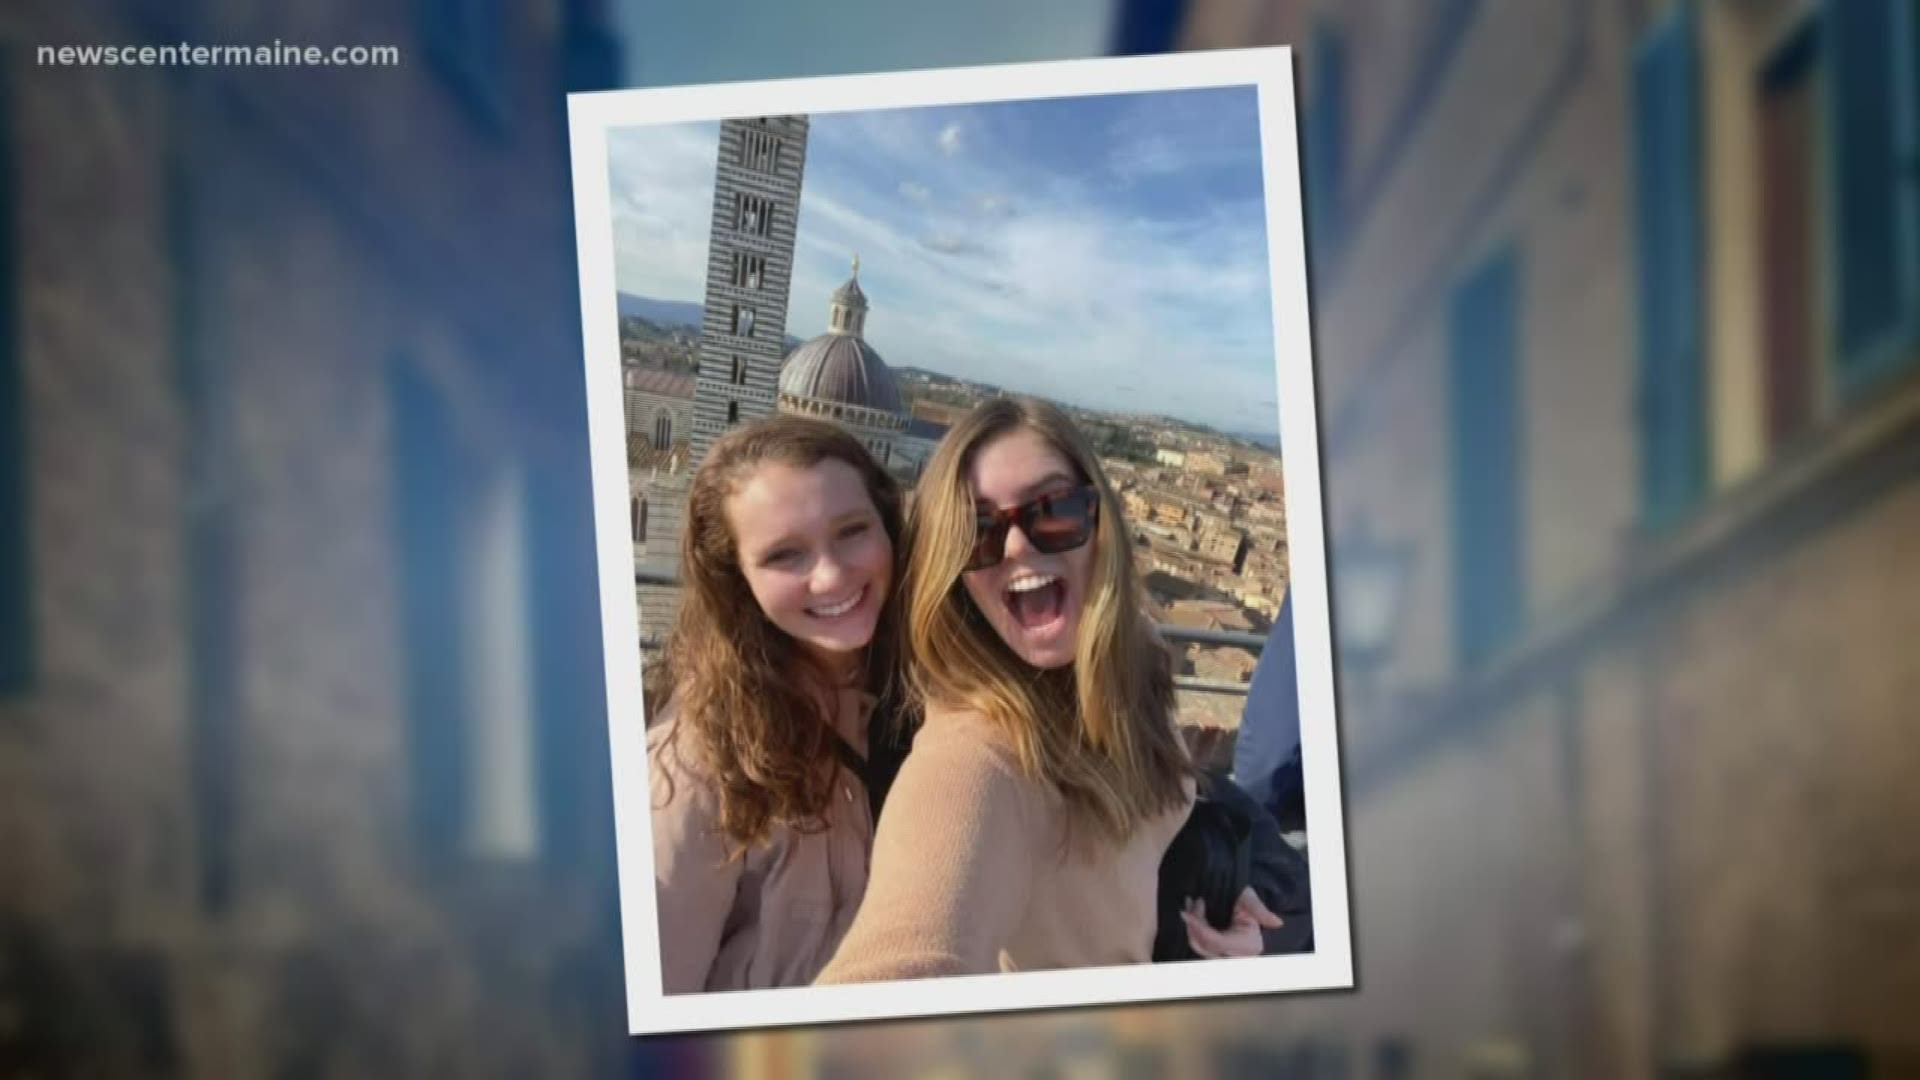 UMaine students studying abroad in Italy coming home due to coronavirus